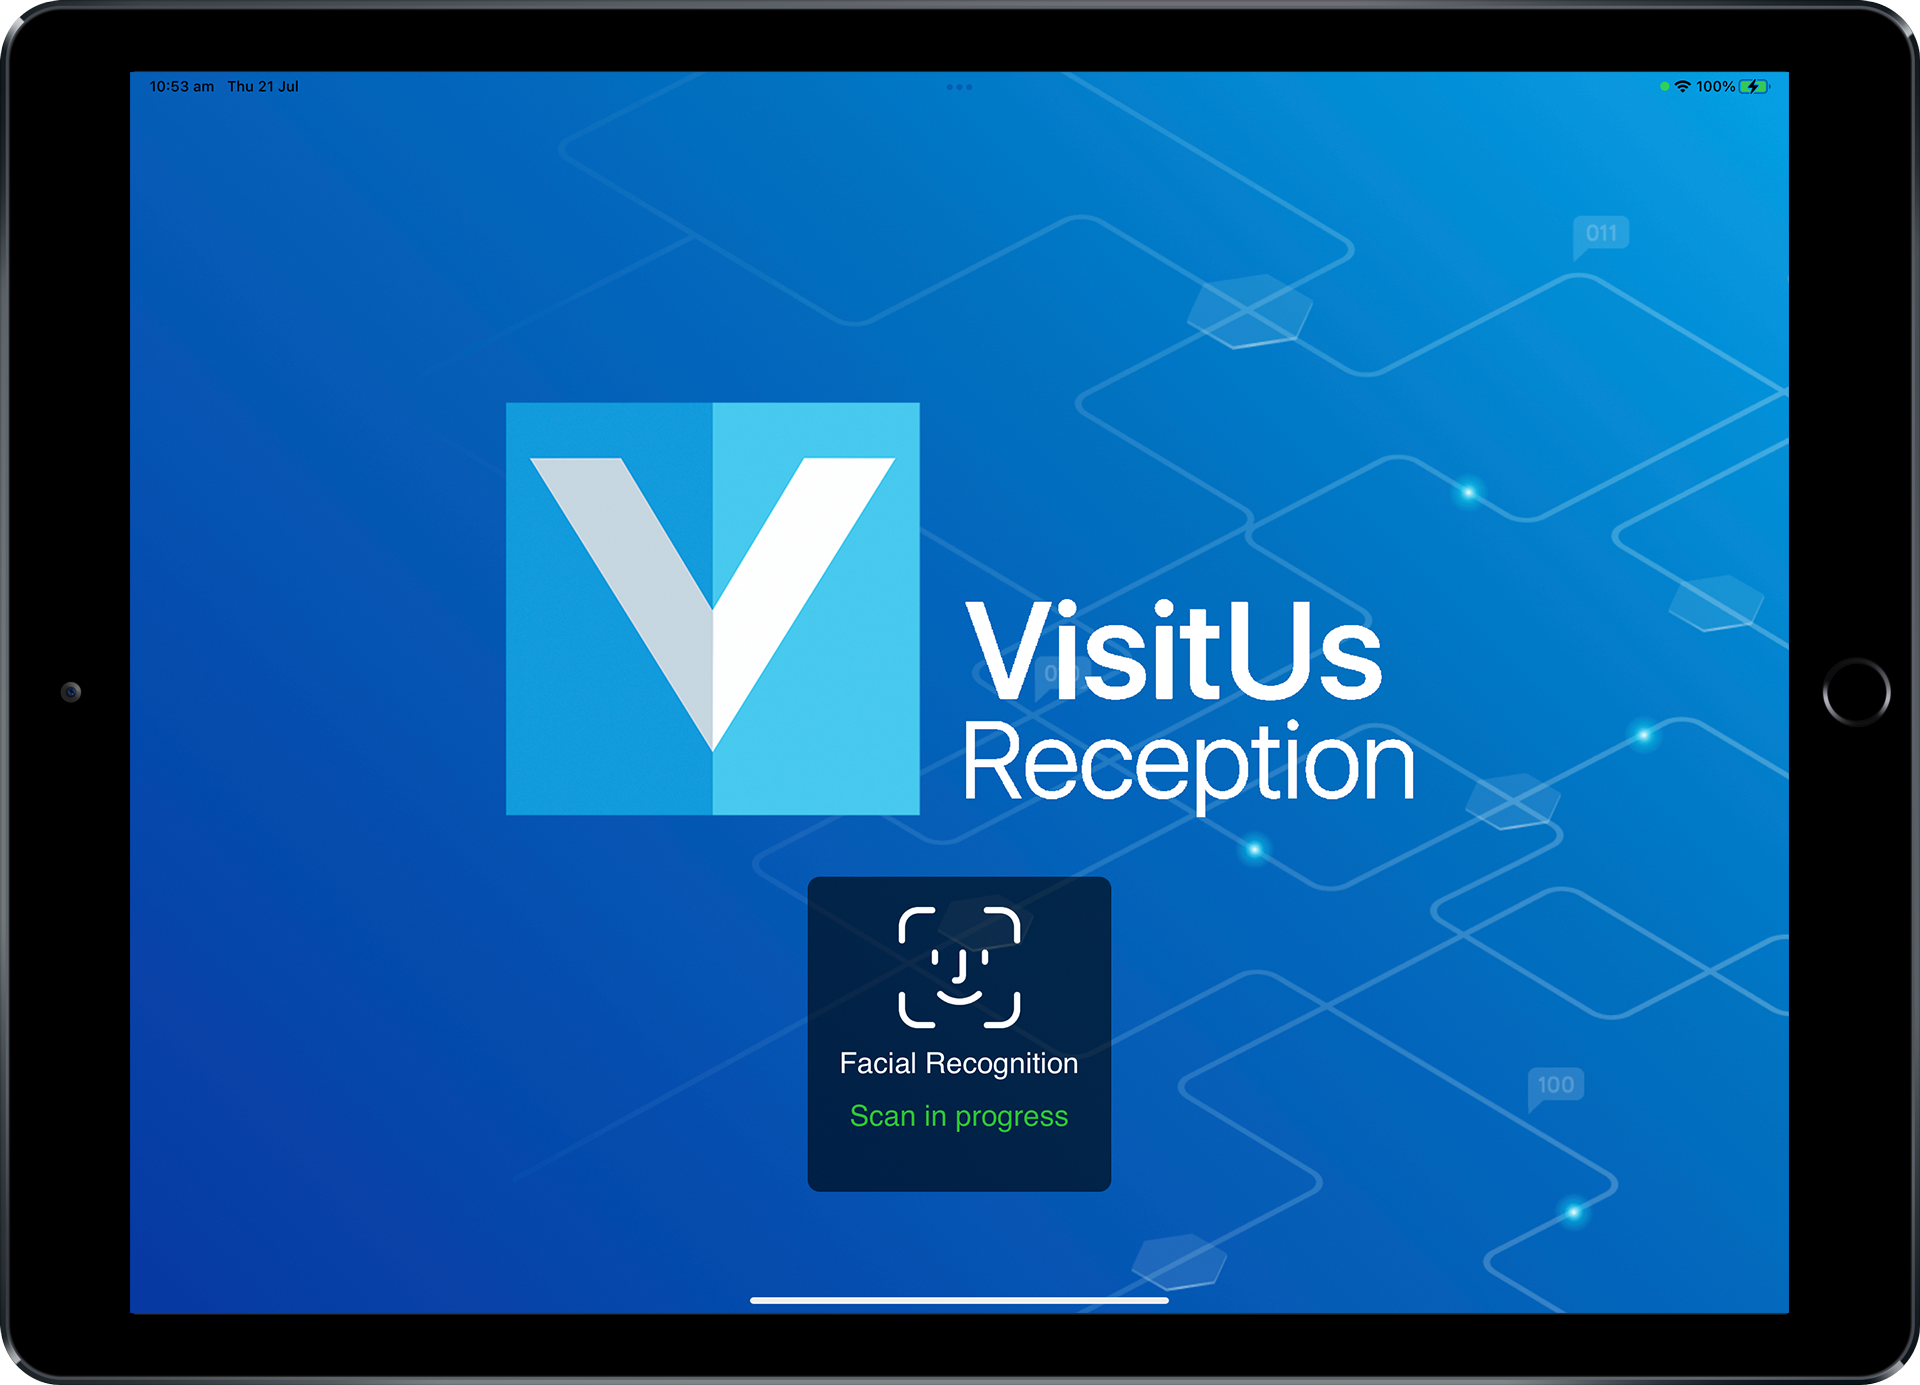 visitor management system feature - facial recognition